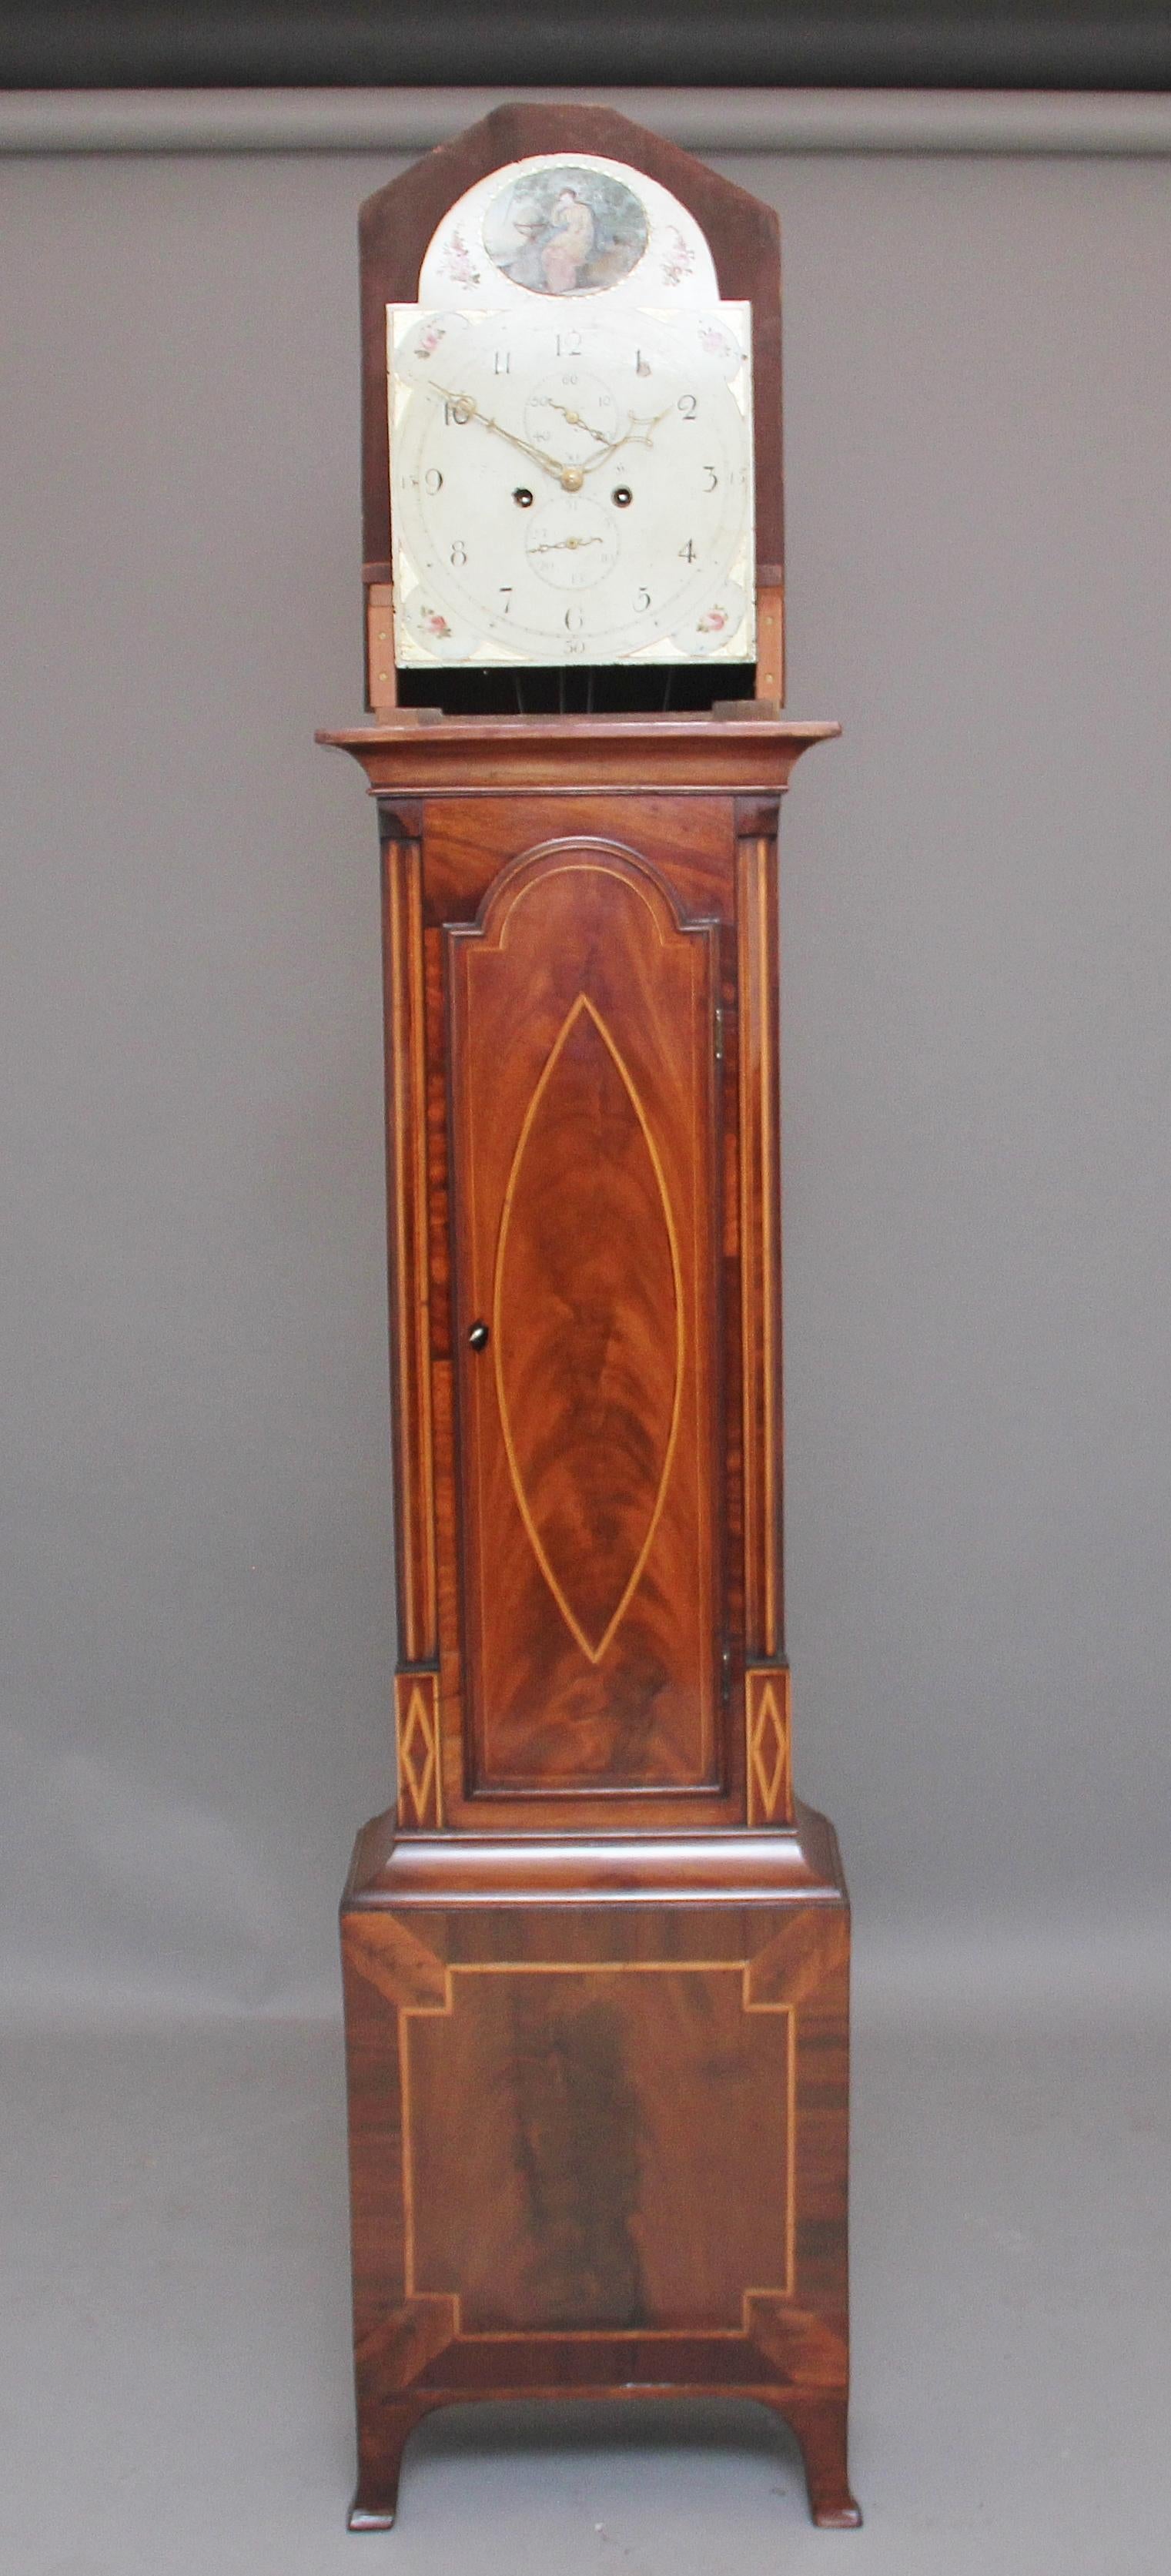 A lovely 19th century mahogany eight day long case clock by Todd of Hull, having an arched painted dial with a seconds dial, the mahogany case has a pagoda shaped hood, the mahogany is inlaid with boxwood and ebony and has a shell inlay at the top,